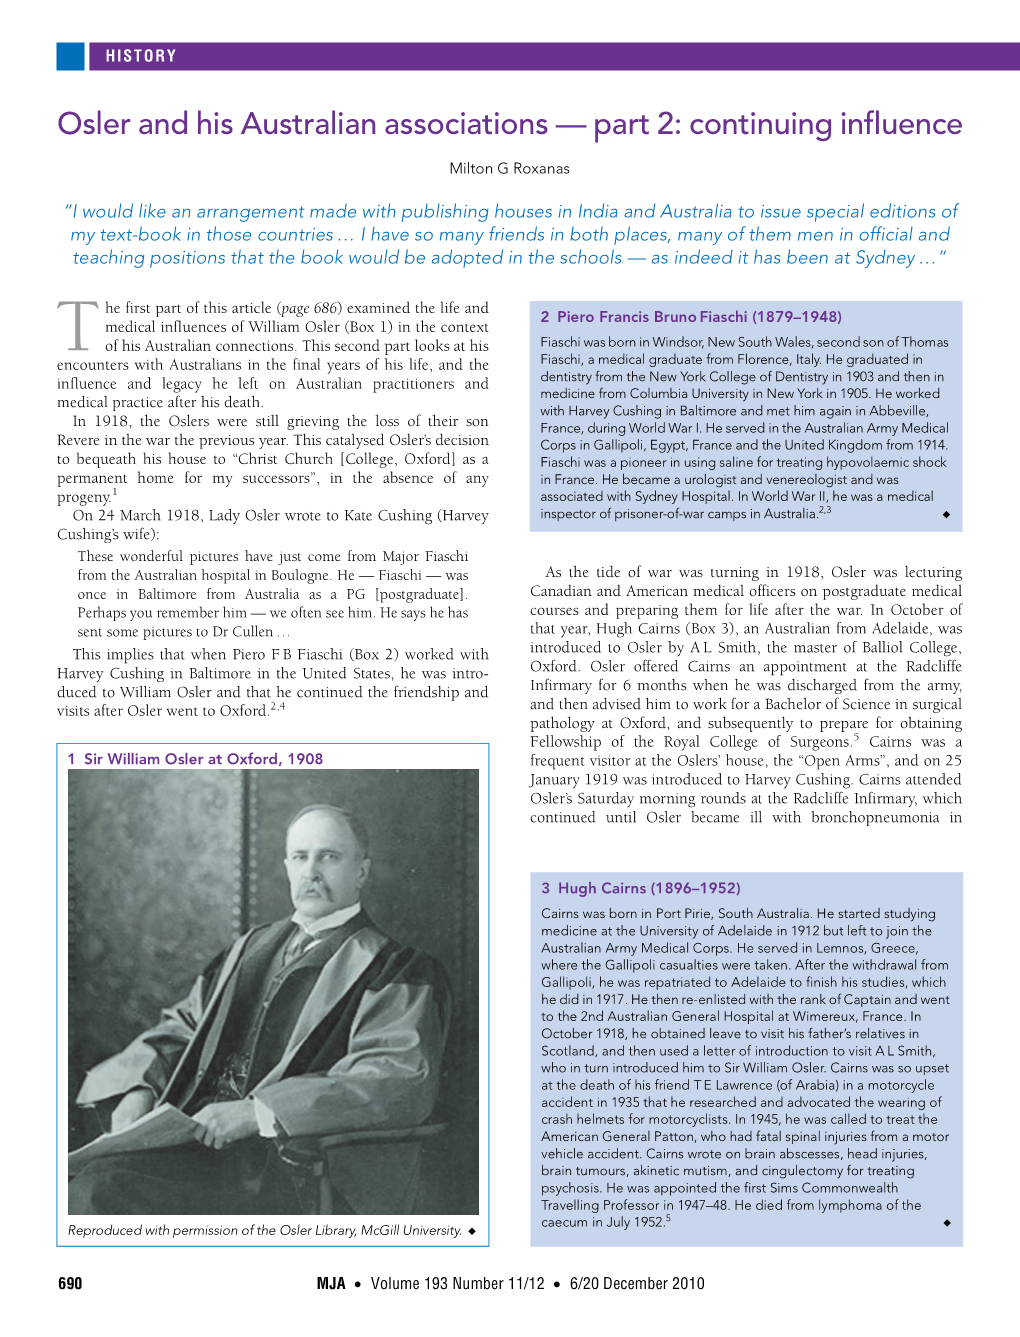 Osler and His Australian Associations — Part 2: Continuing Influence